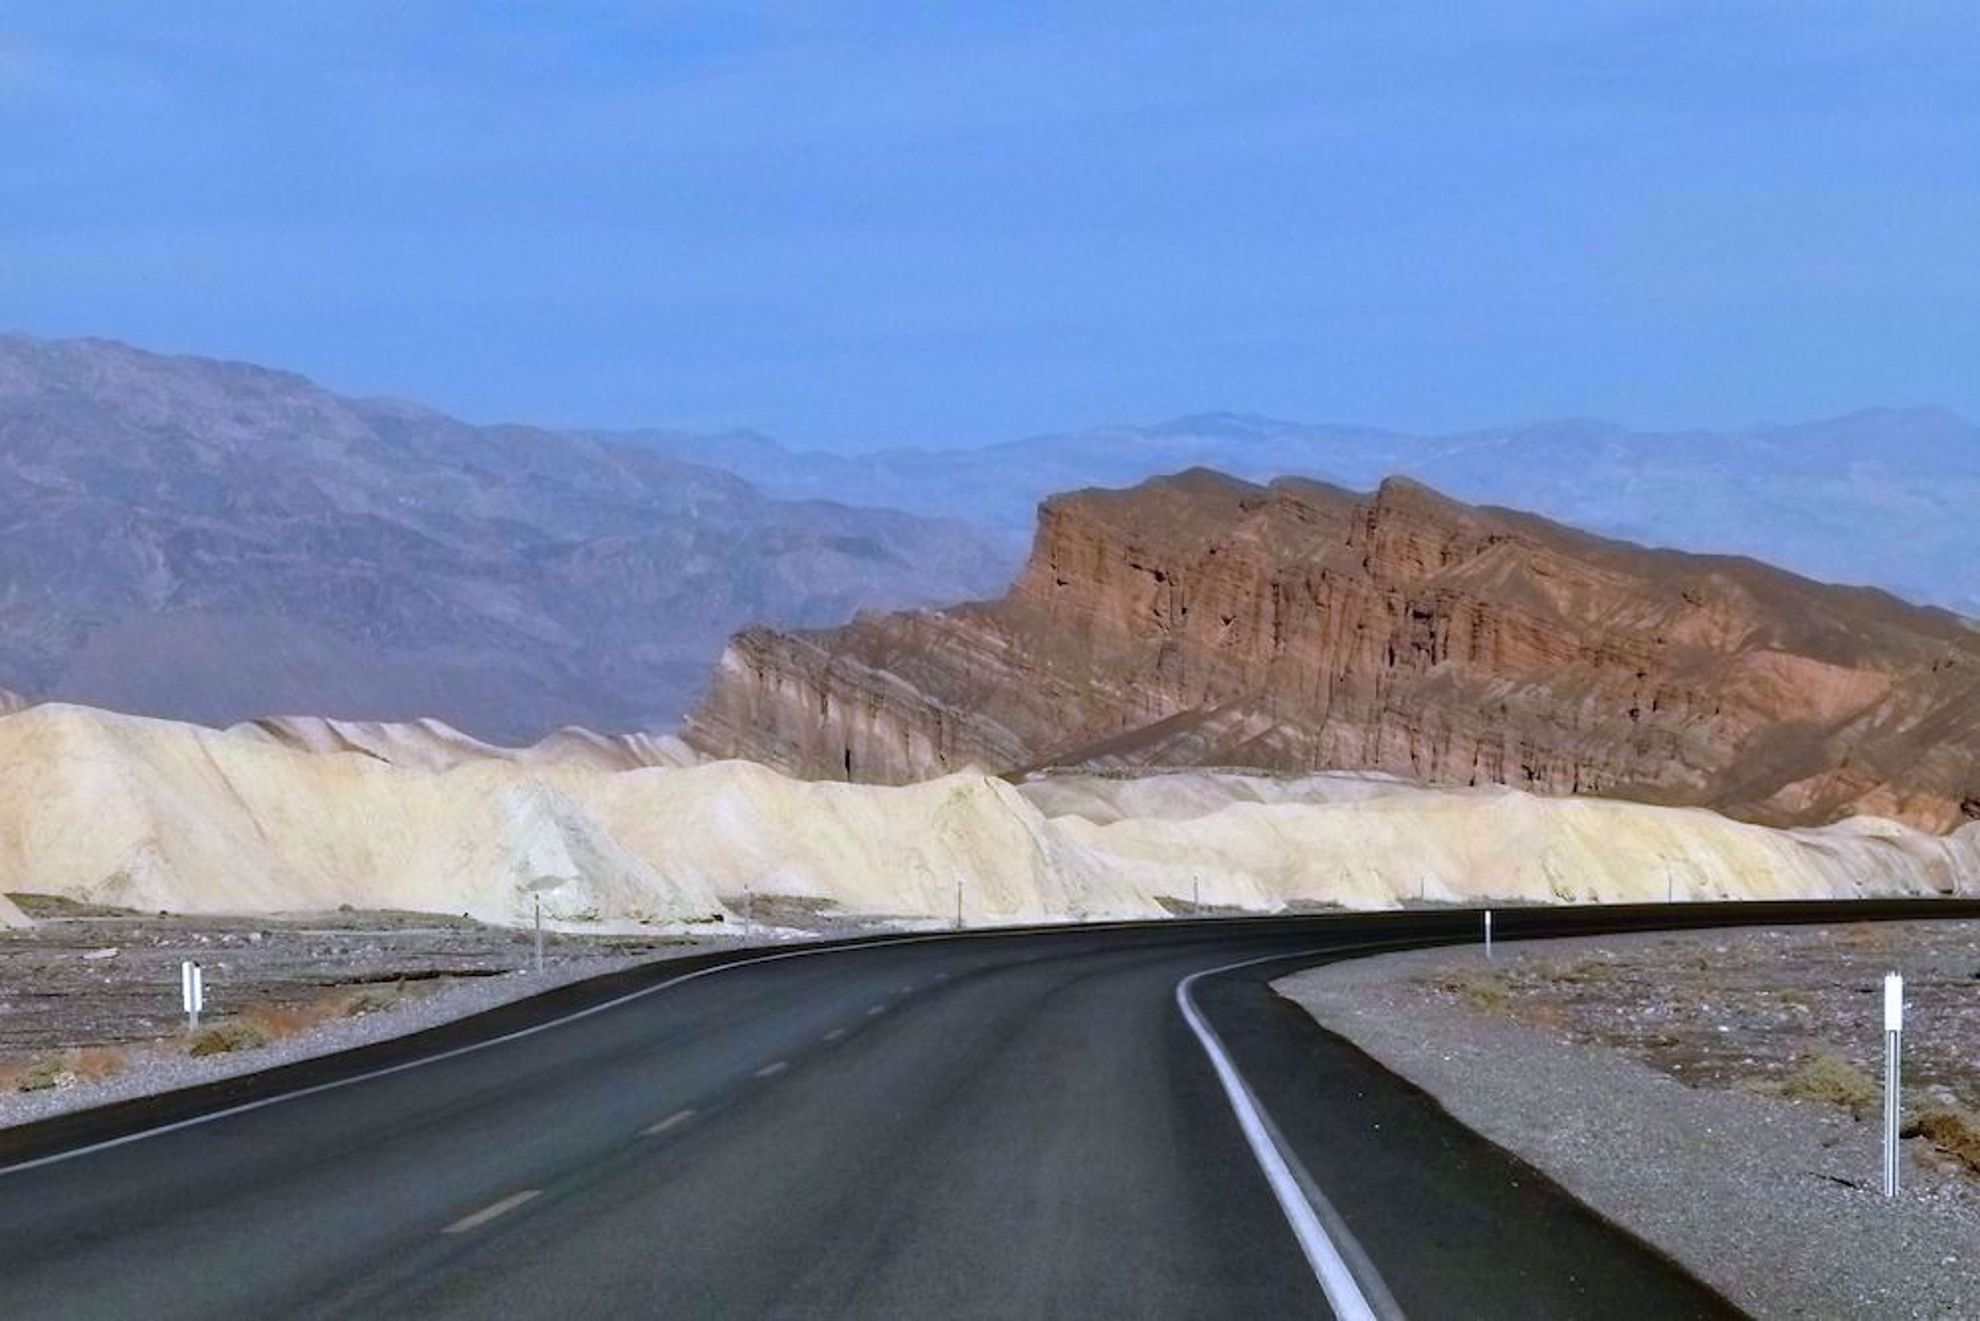 Zabriskie with dunes and road